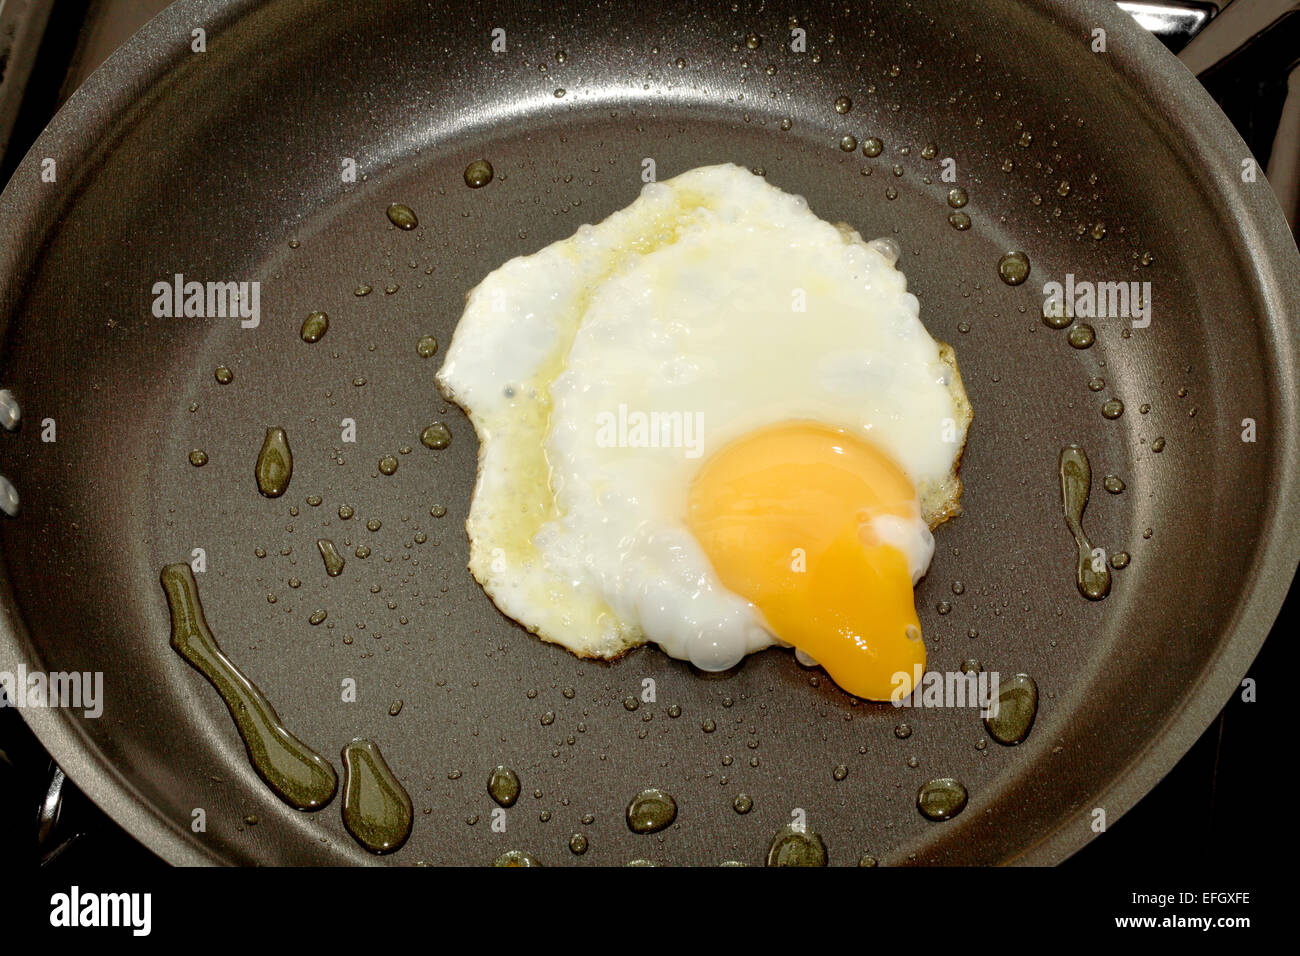 A broken fried egg in a frying pan with the yolk running out Stock Photo